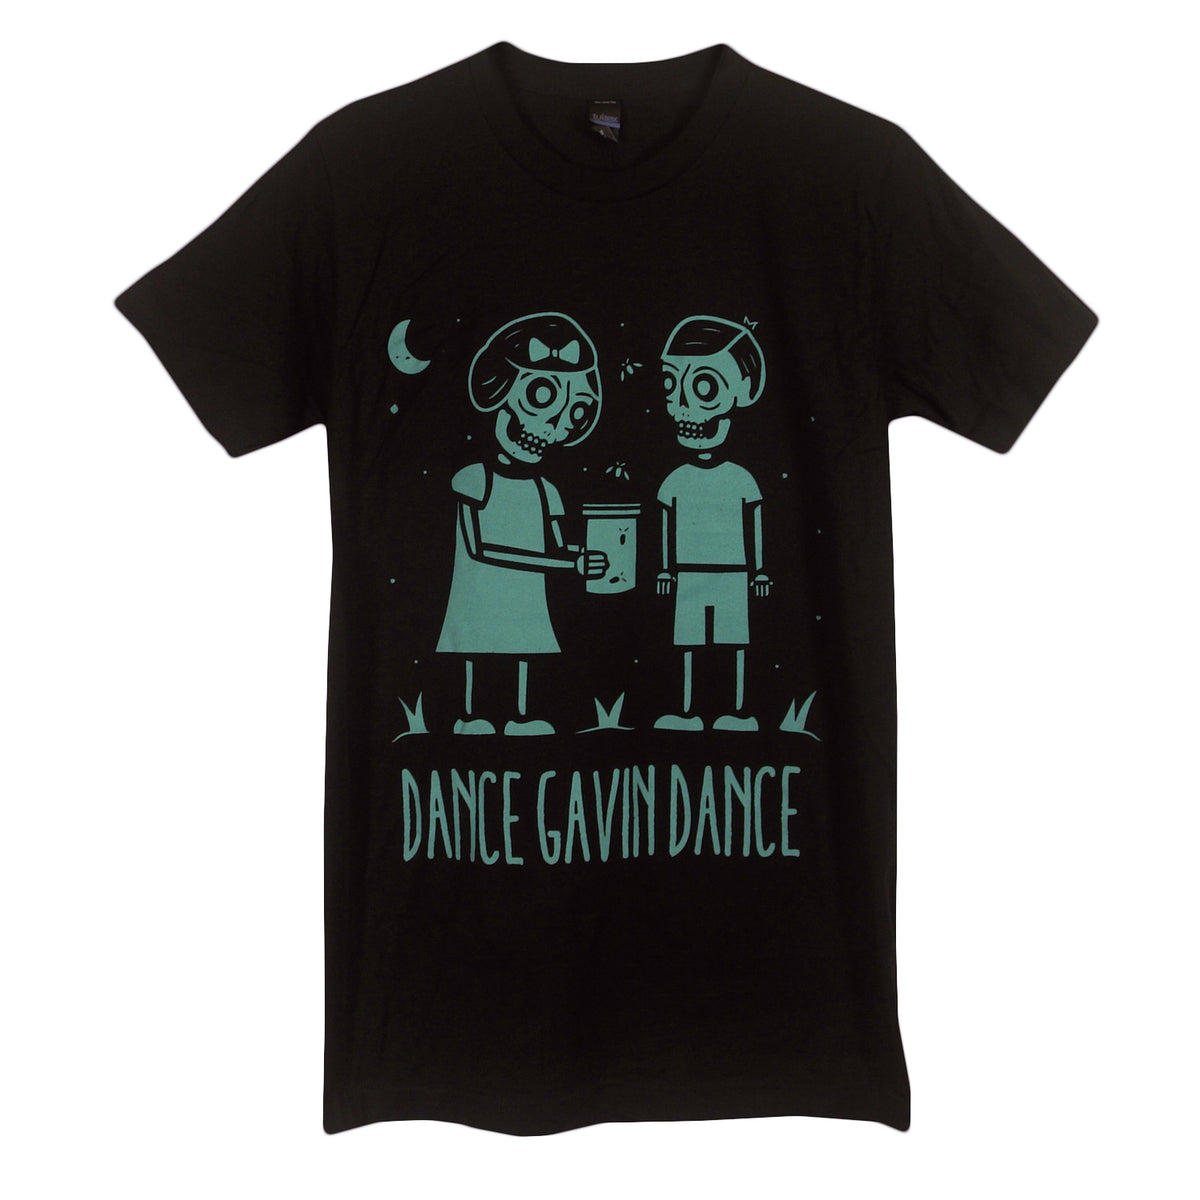 image of a black tee shirt on a white background. tee has full body print in teal of a boy and girl skeleton standing outside at night. across the bottom says dance gavin dance